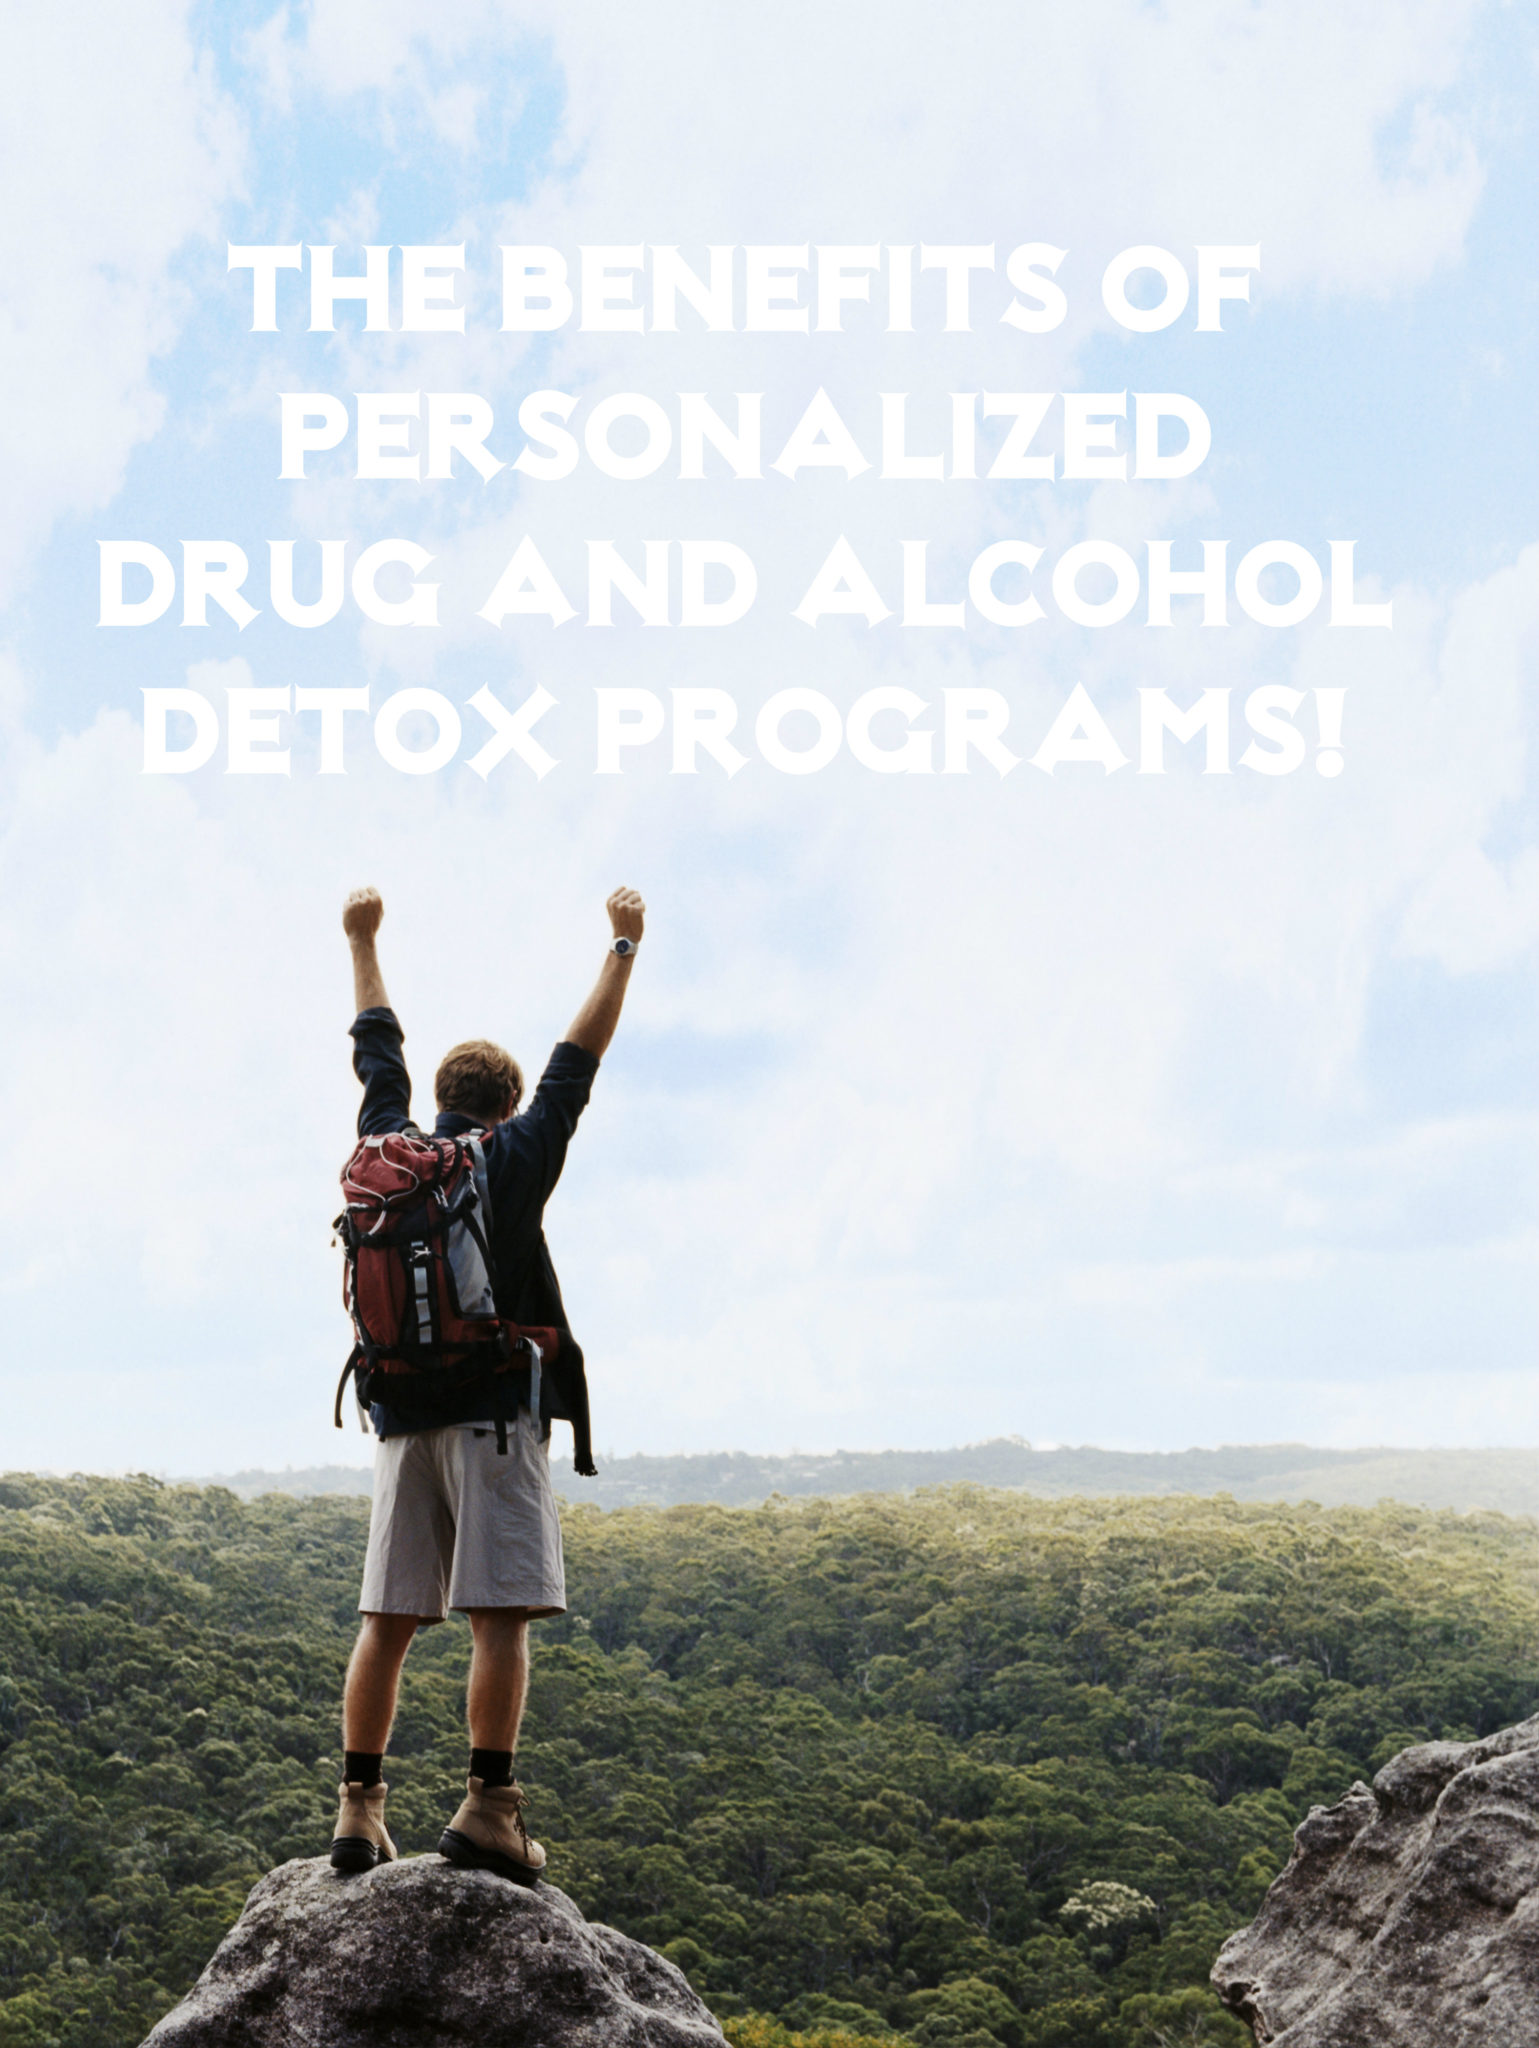 Why Personalized Drug And Alcohol Detox Programs Are Necessary